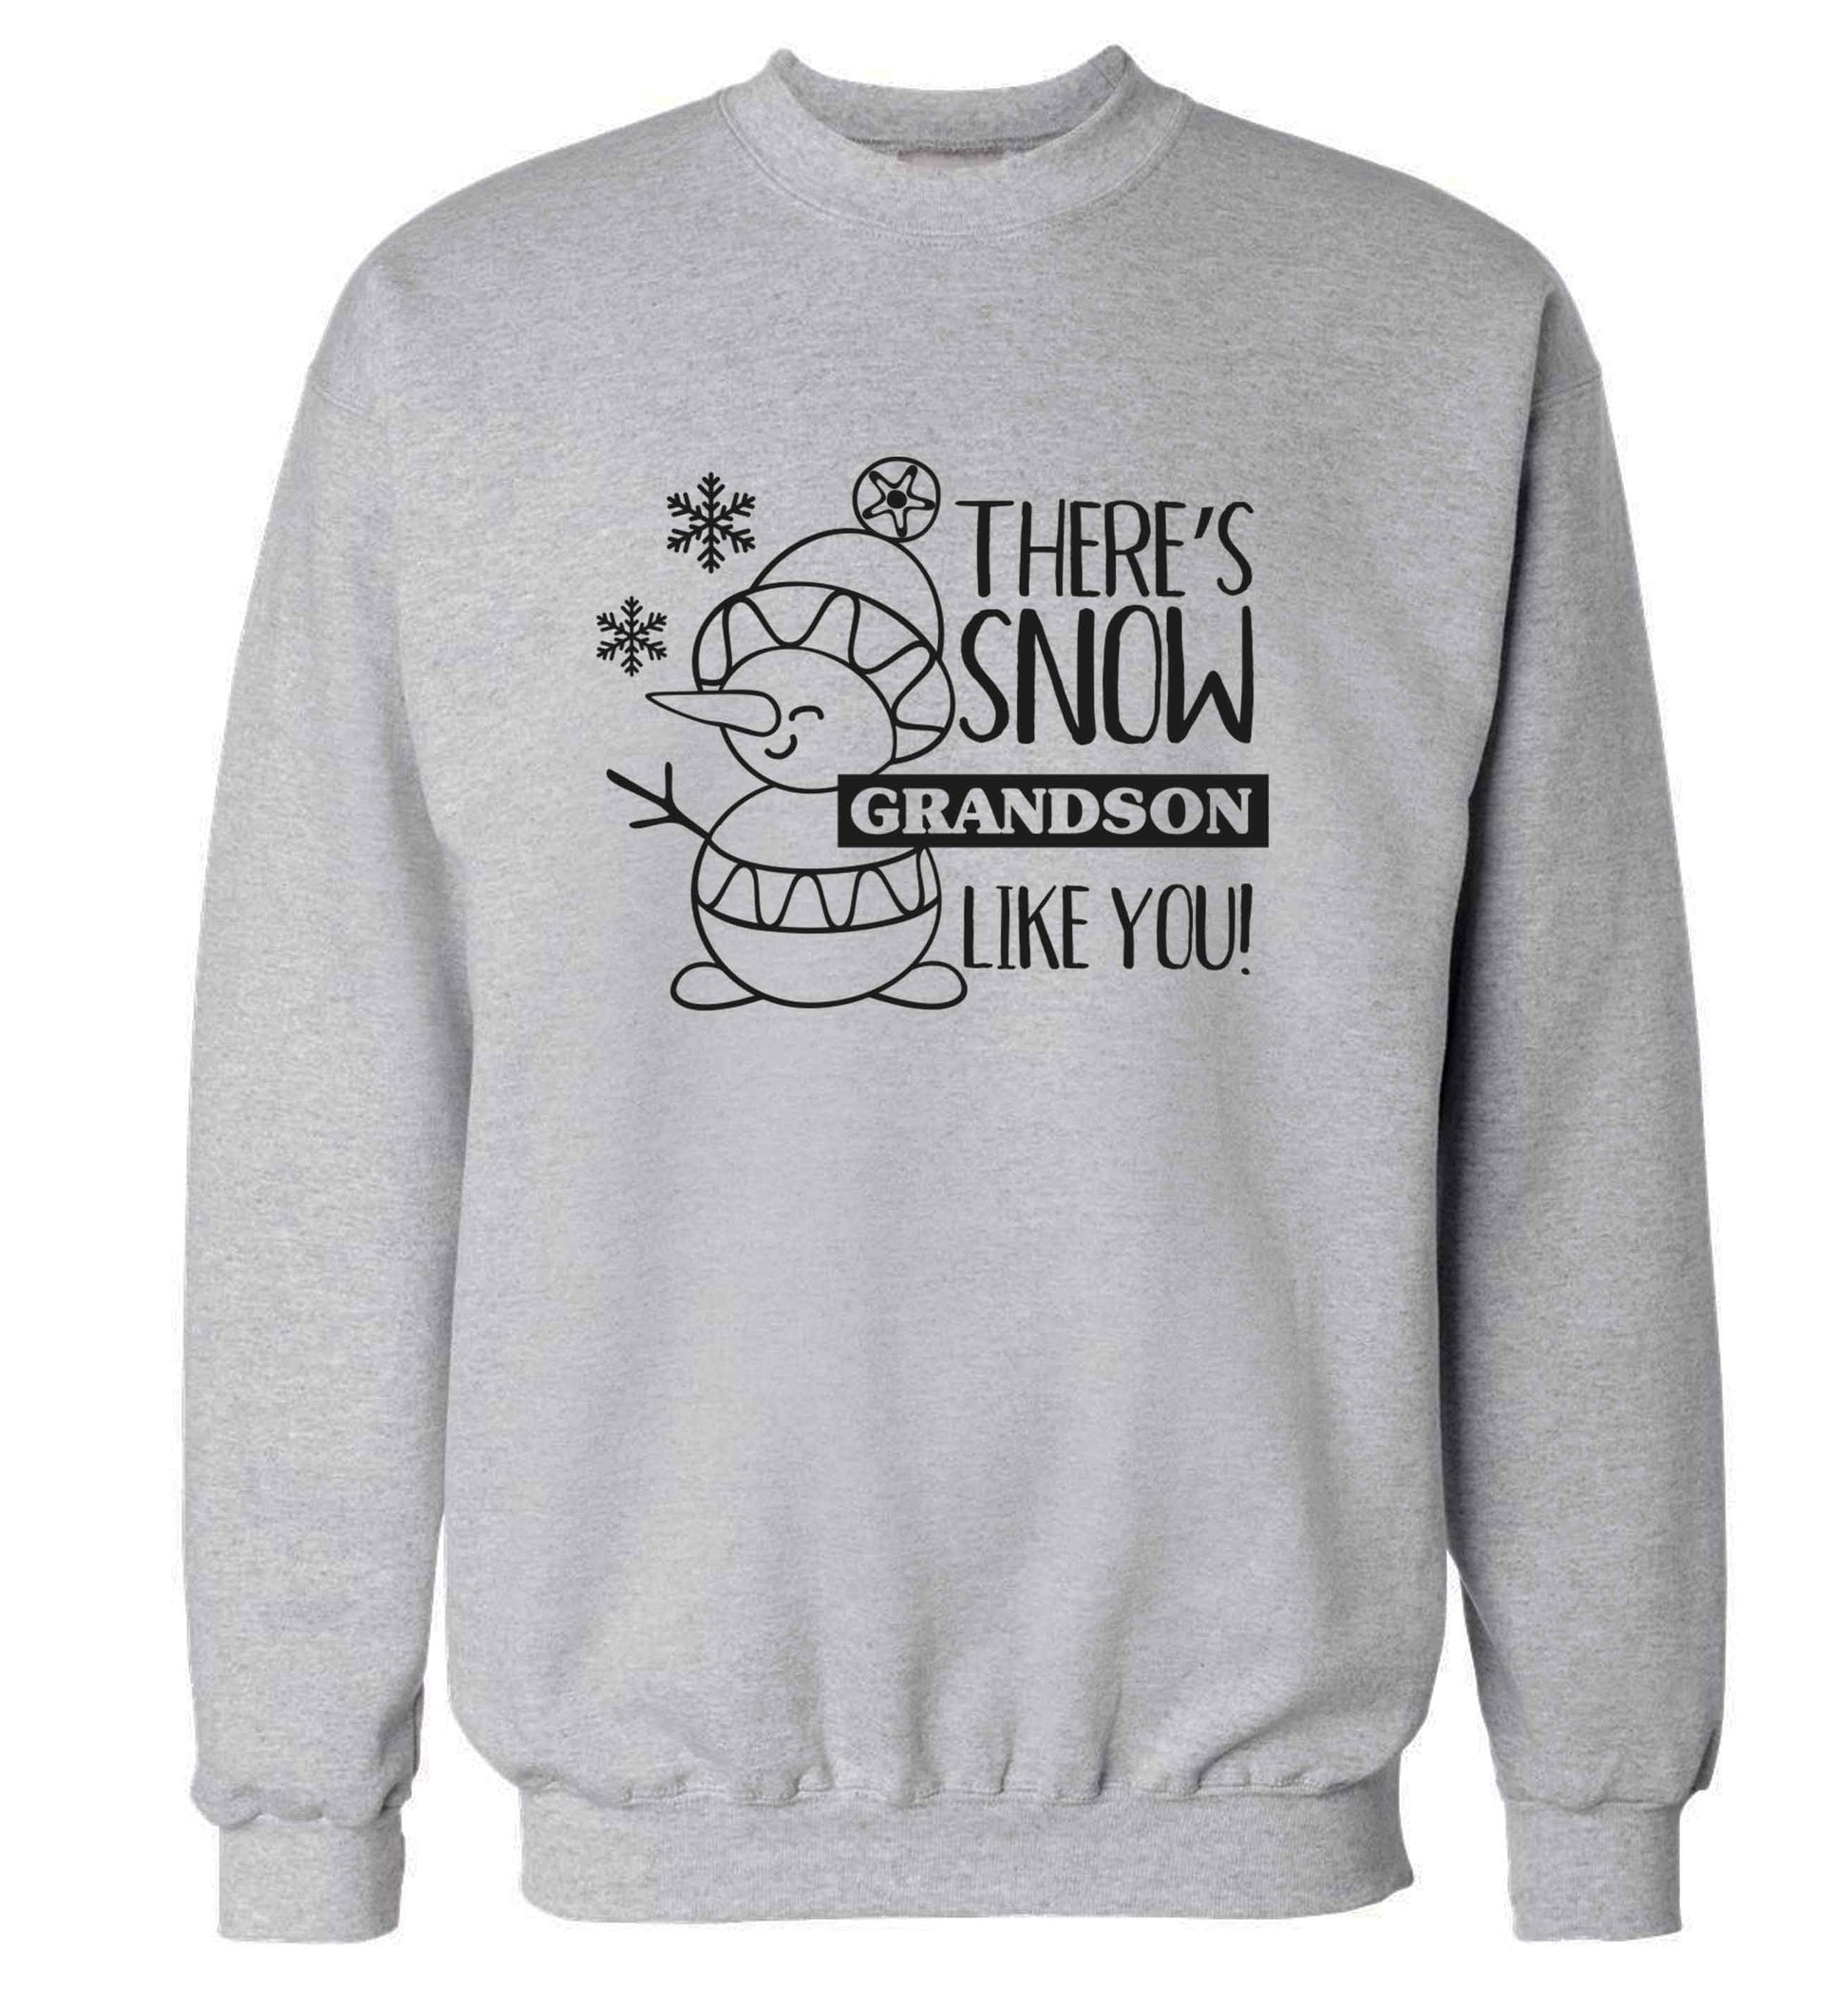 There's snow grandson like you adult's unisex grey sweater 2XL